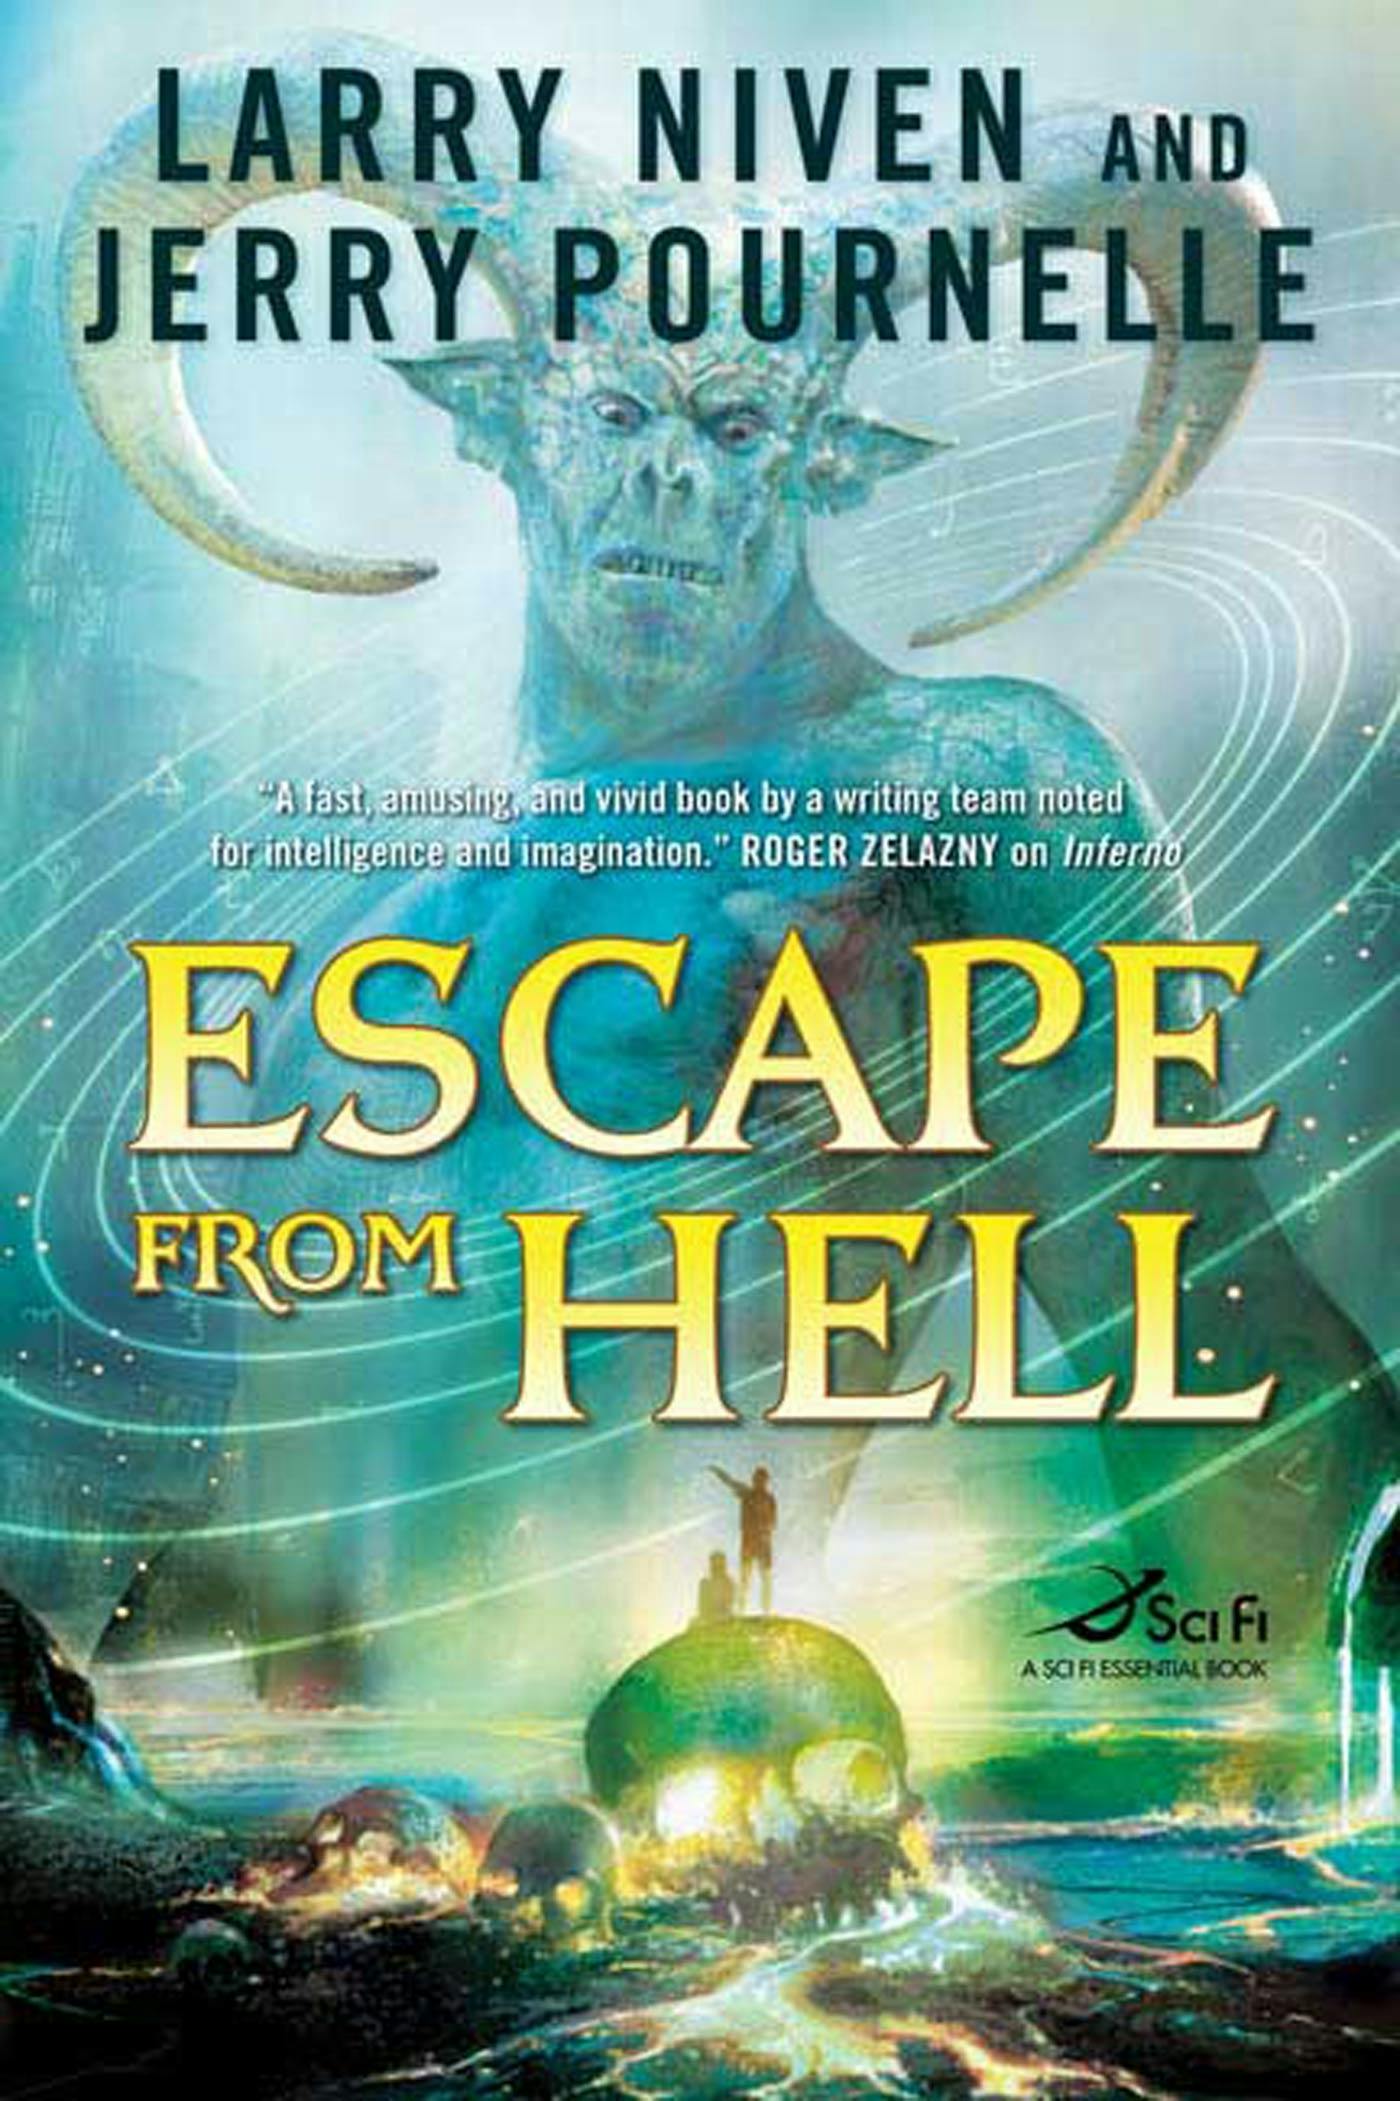 Cover for the book titled as: Escape from Hell